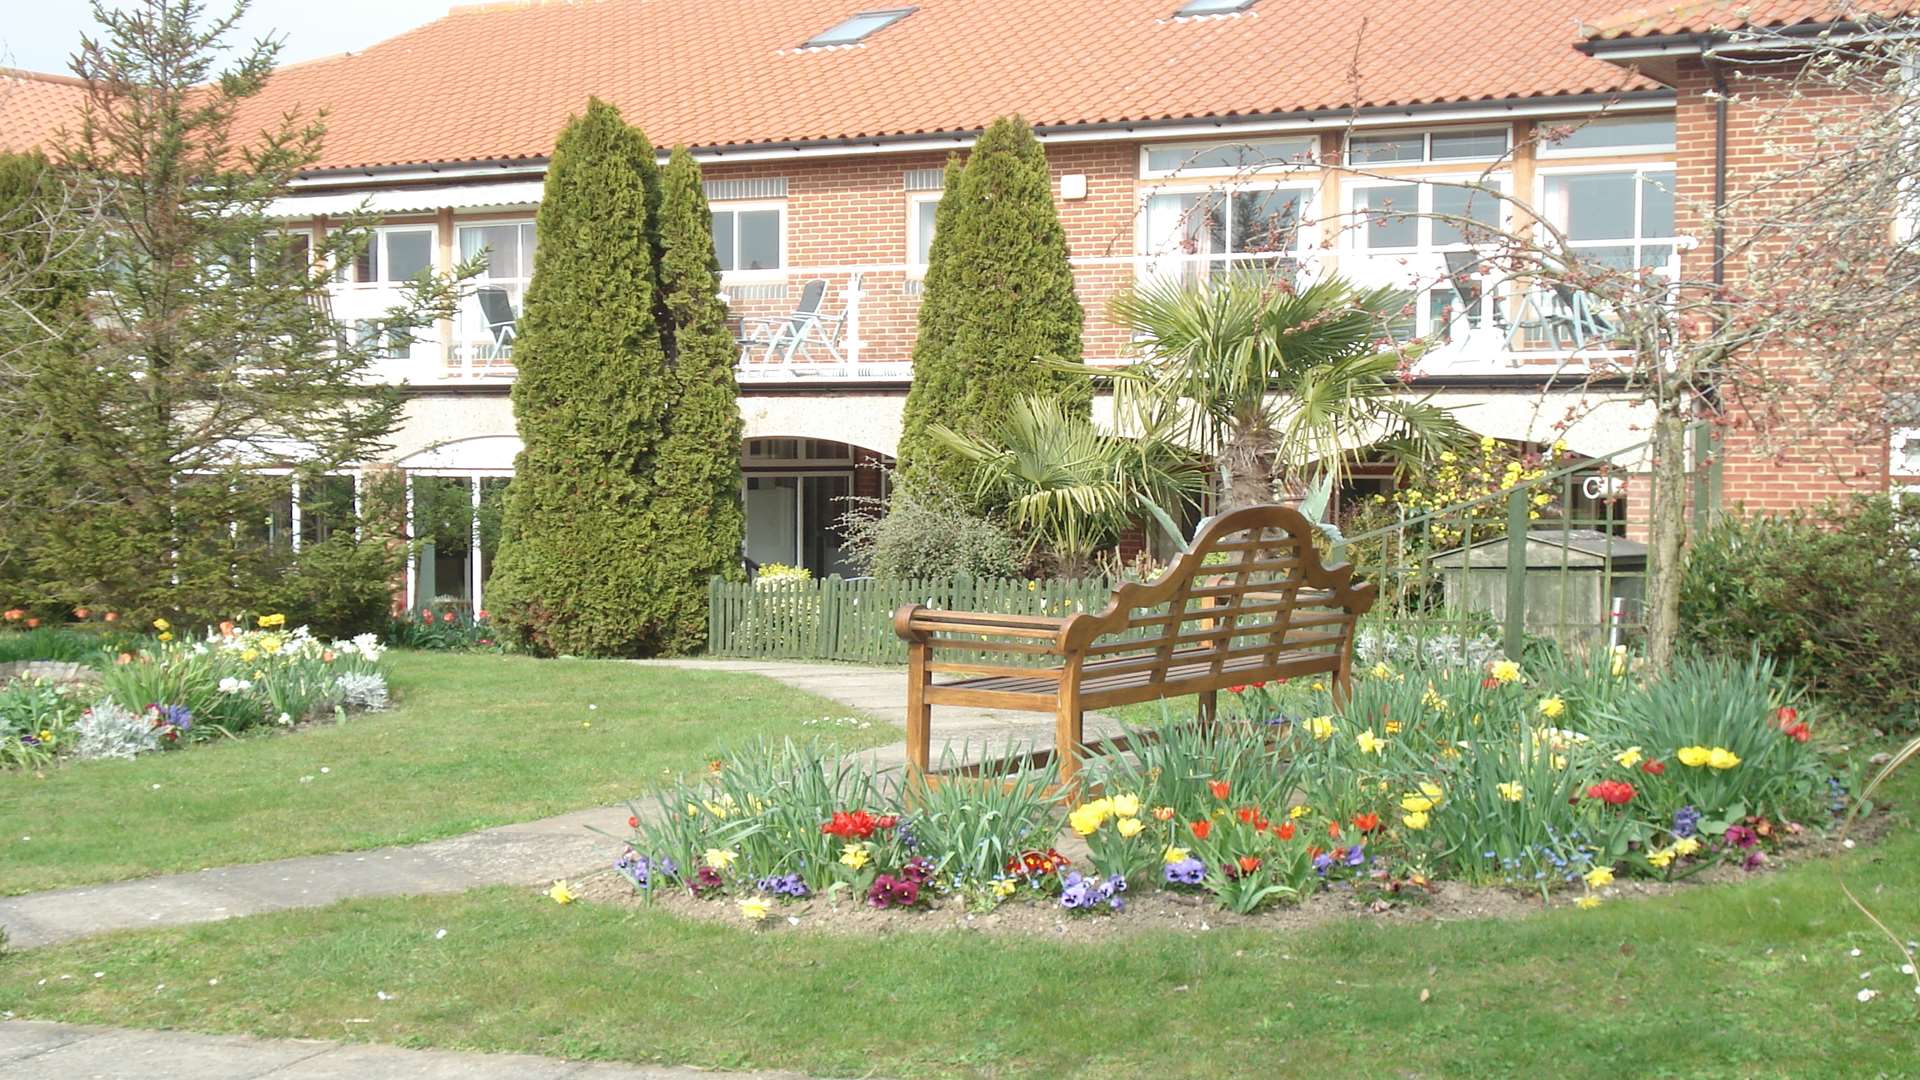 The garden at the Pilgrims Hospice in Thanet